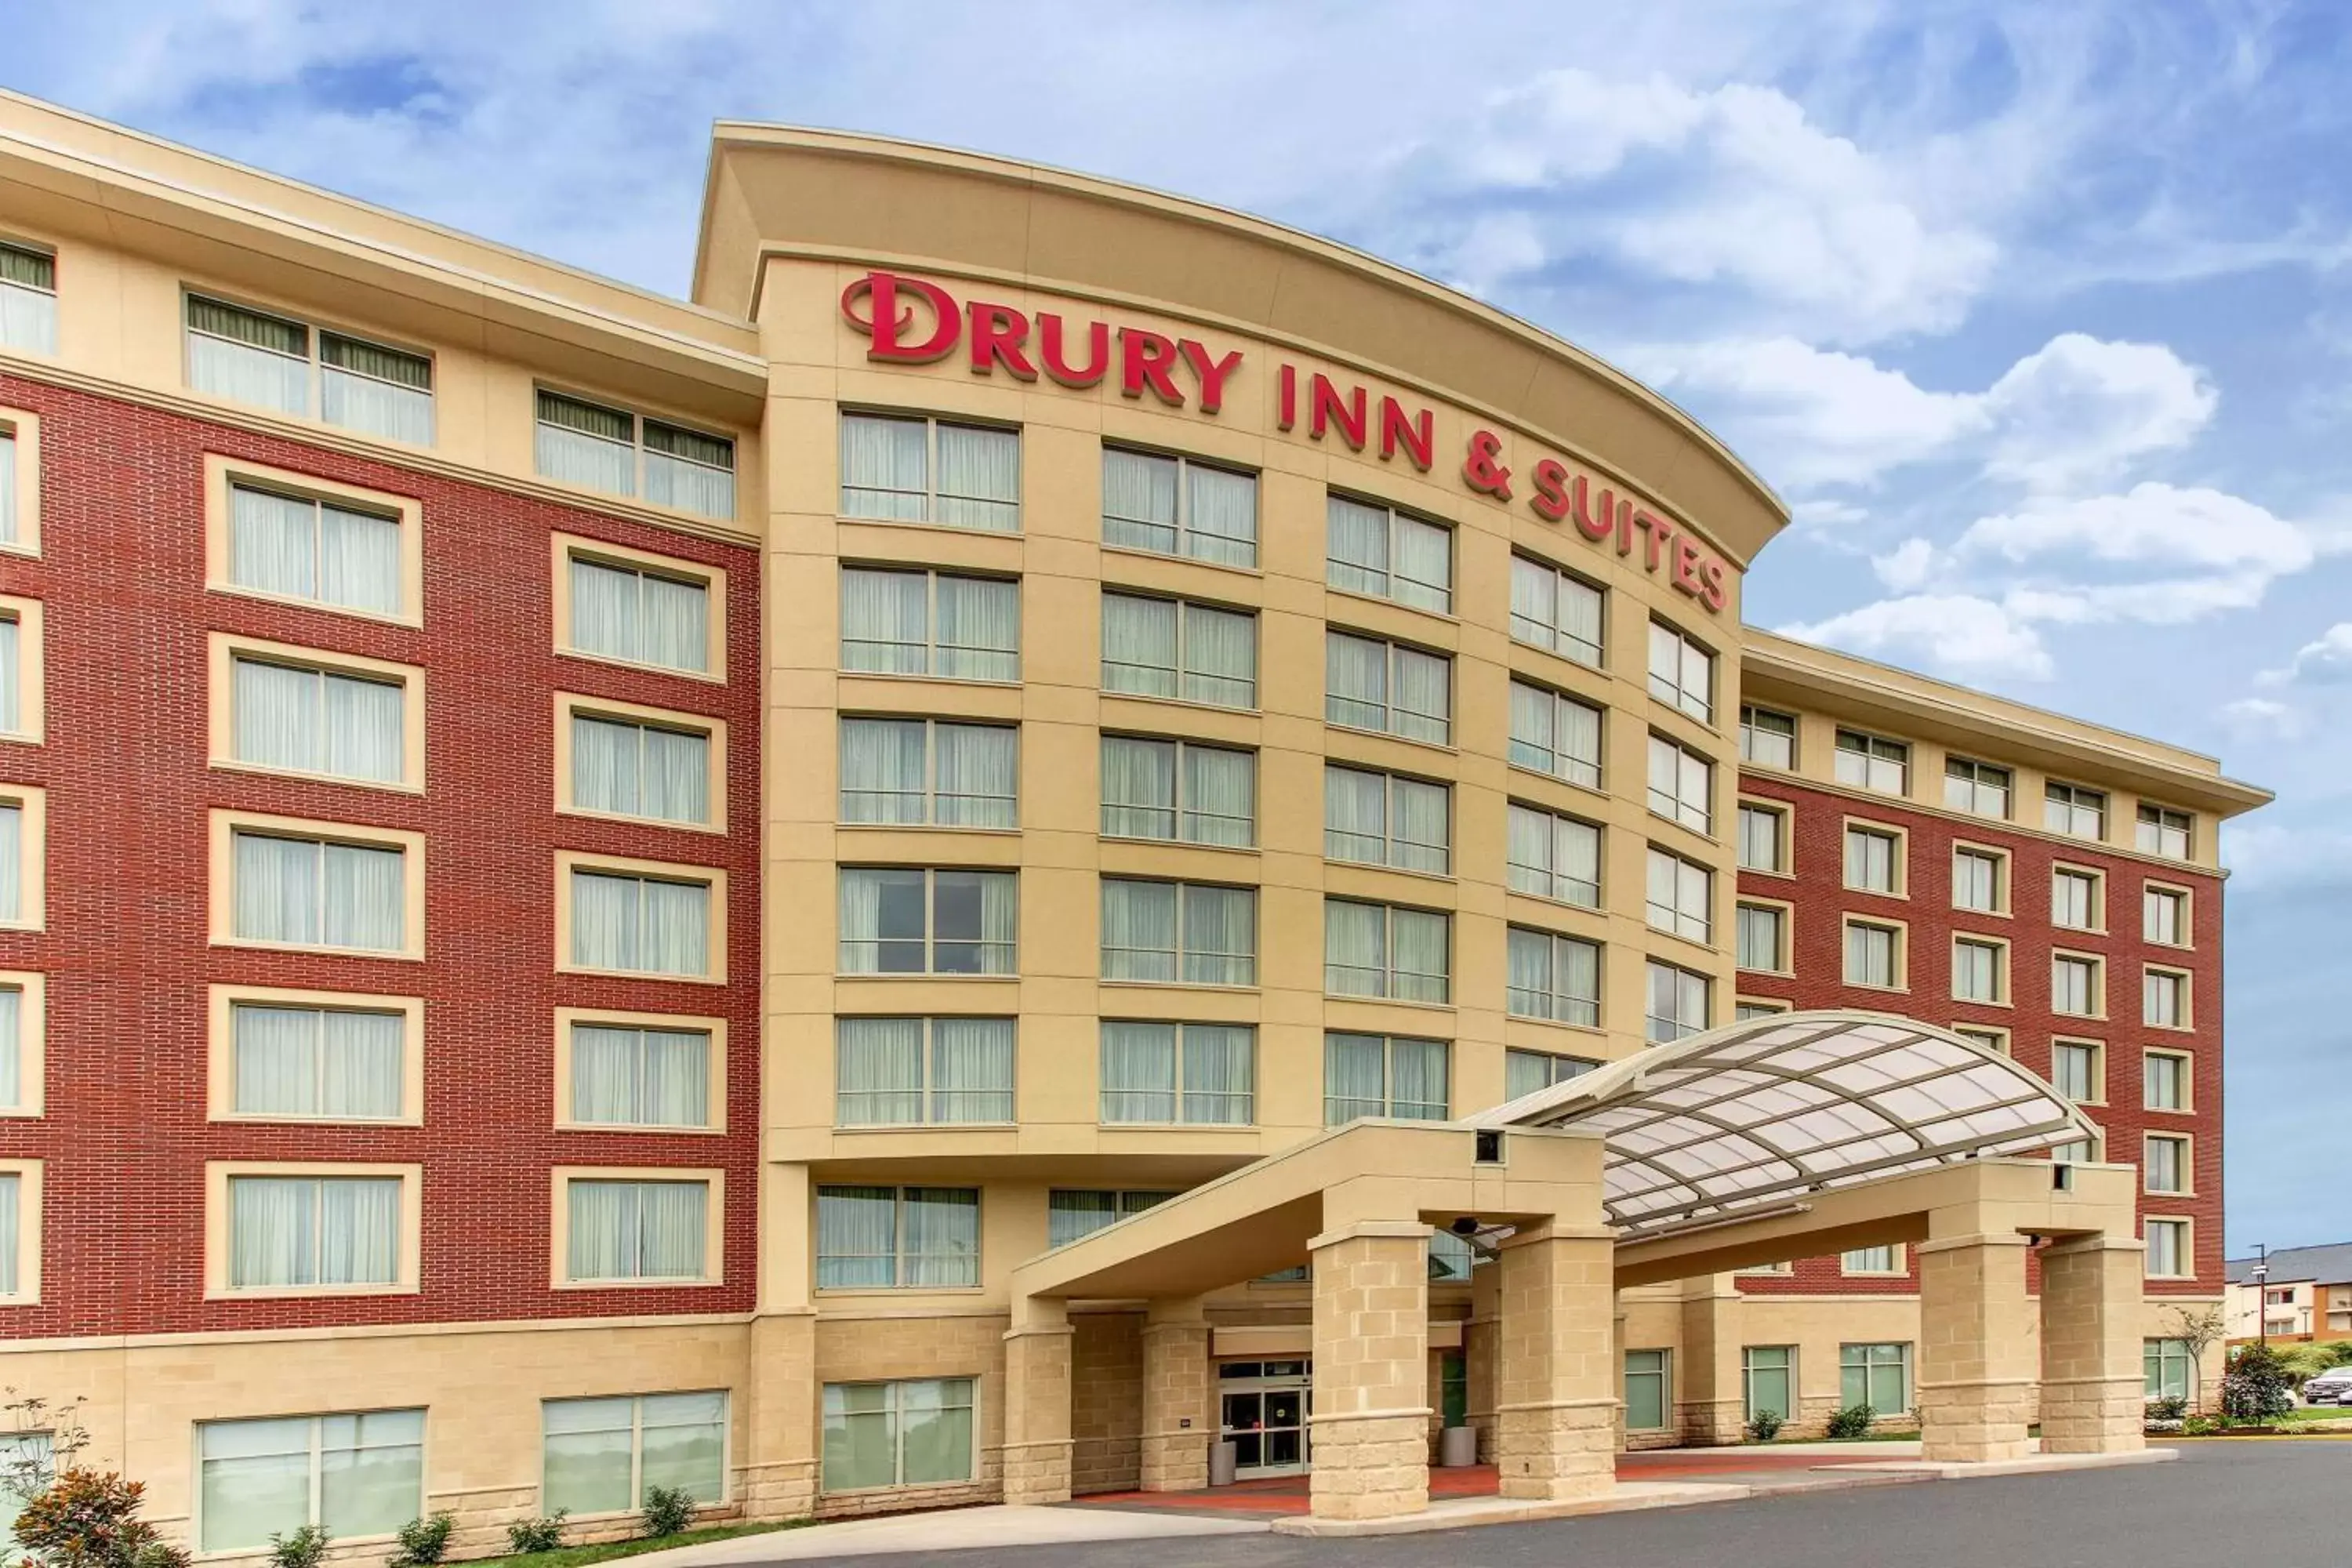 Property building in Drury Inn & Suites Knoxville West